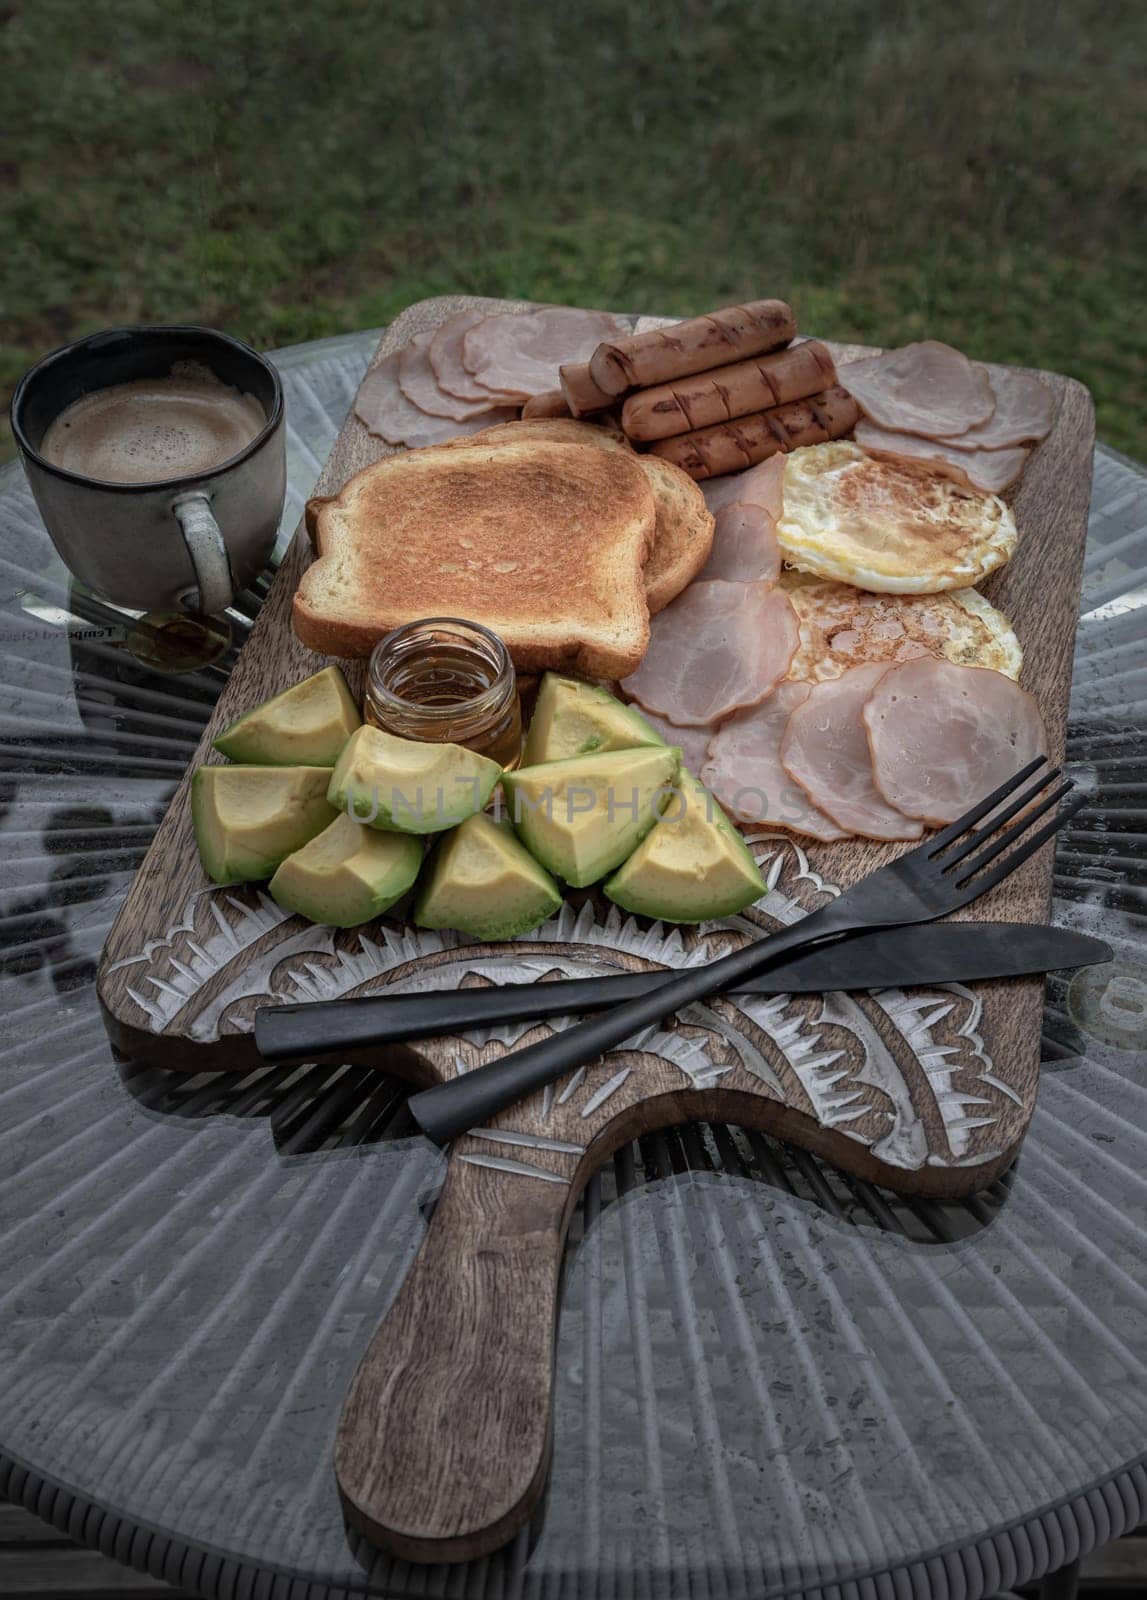 breakfast is including Fried sausages, Fried eggs, Toast breads and cut avocados served with Honey and Cup of coffee. by tosirikul